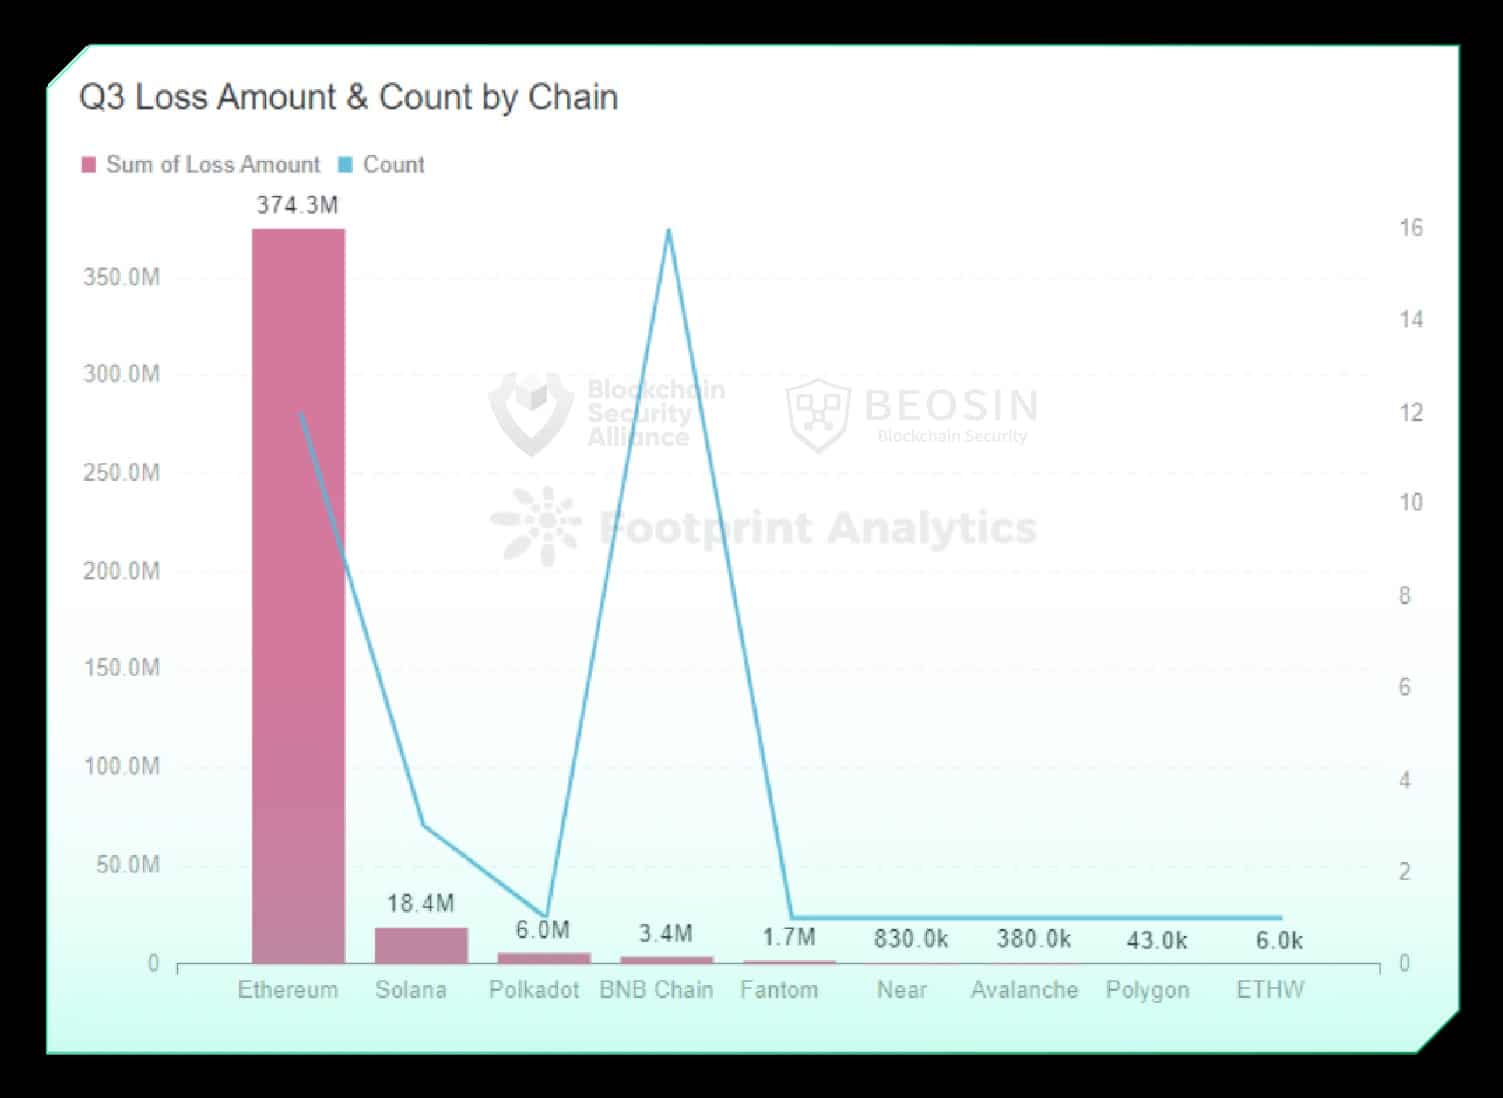 Q3 loss amount &amp ; count by chain